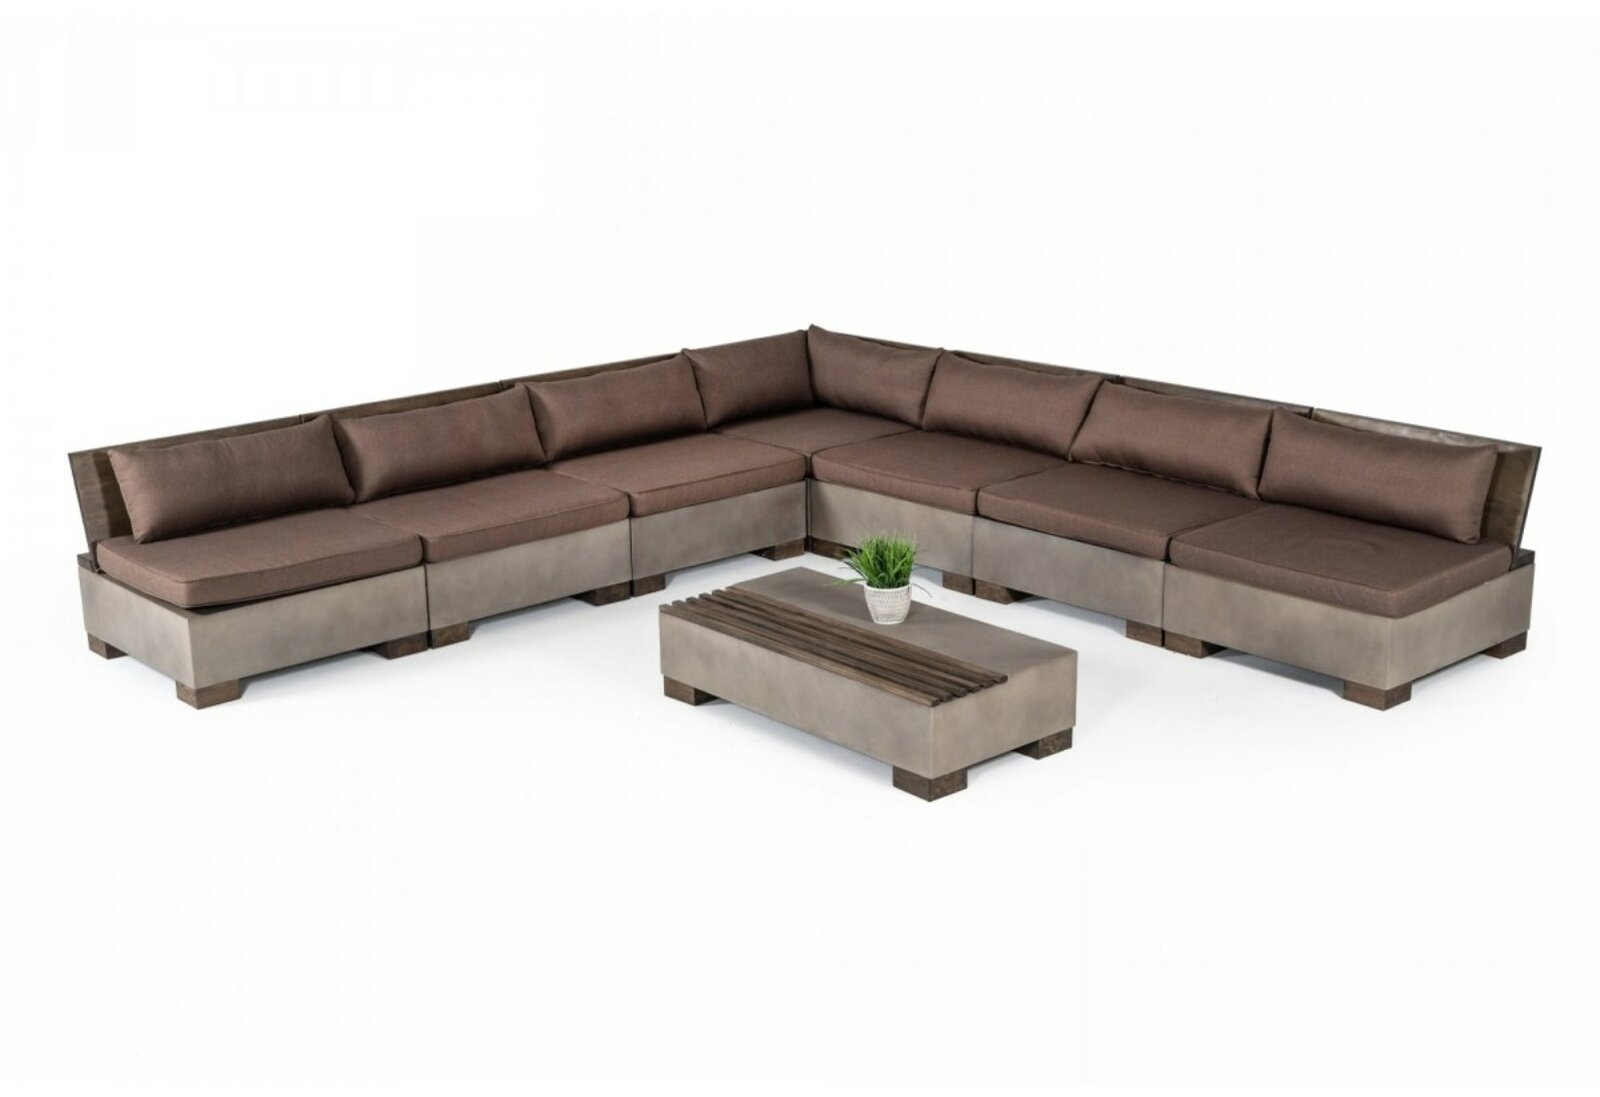 VIG Furniture Delaware Outdoor Patio Sectional with Cushions & Reviews